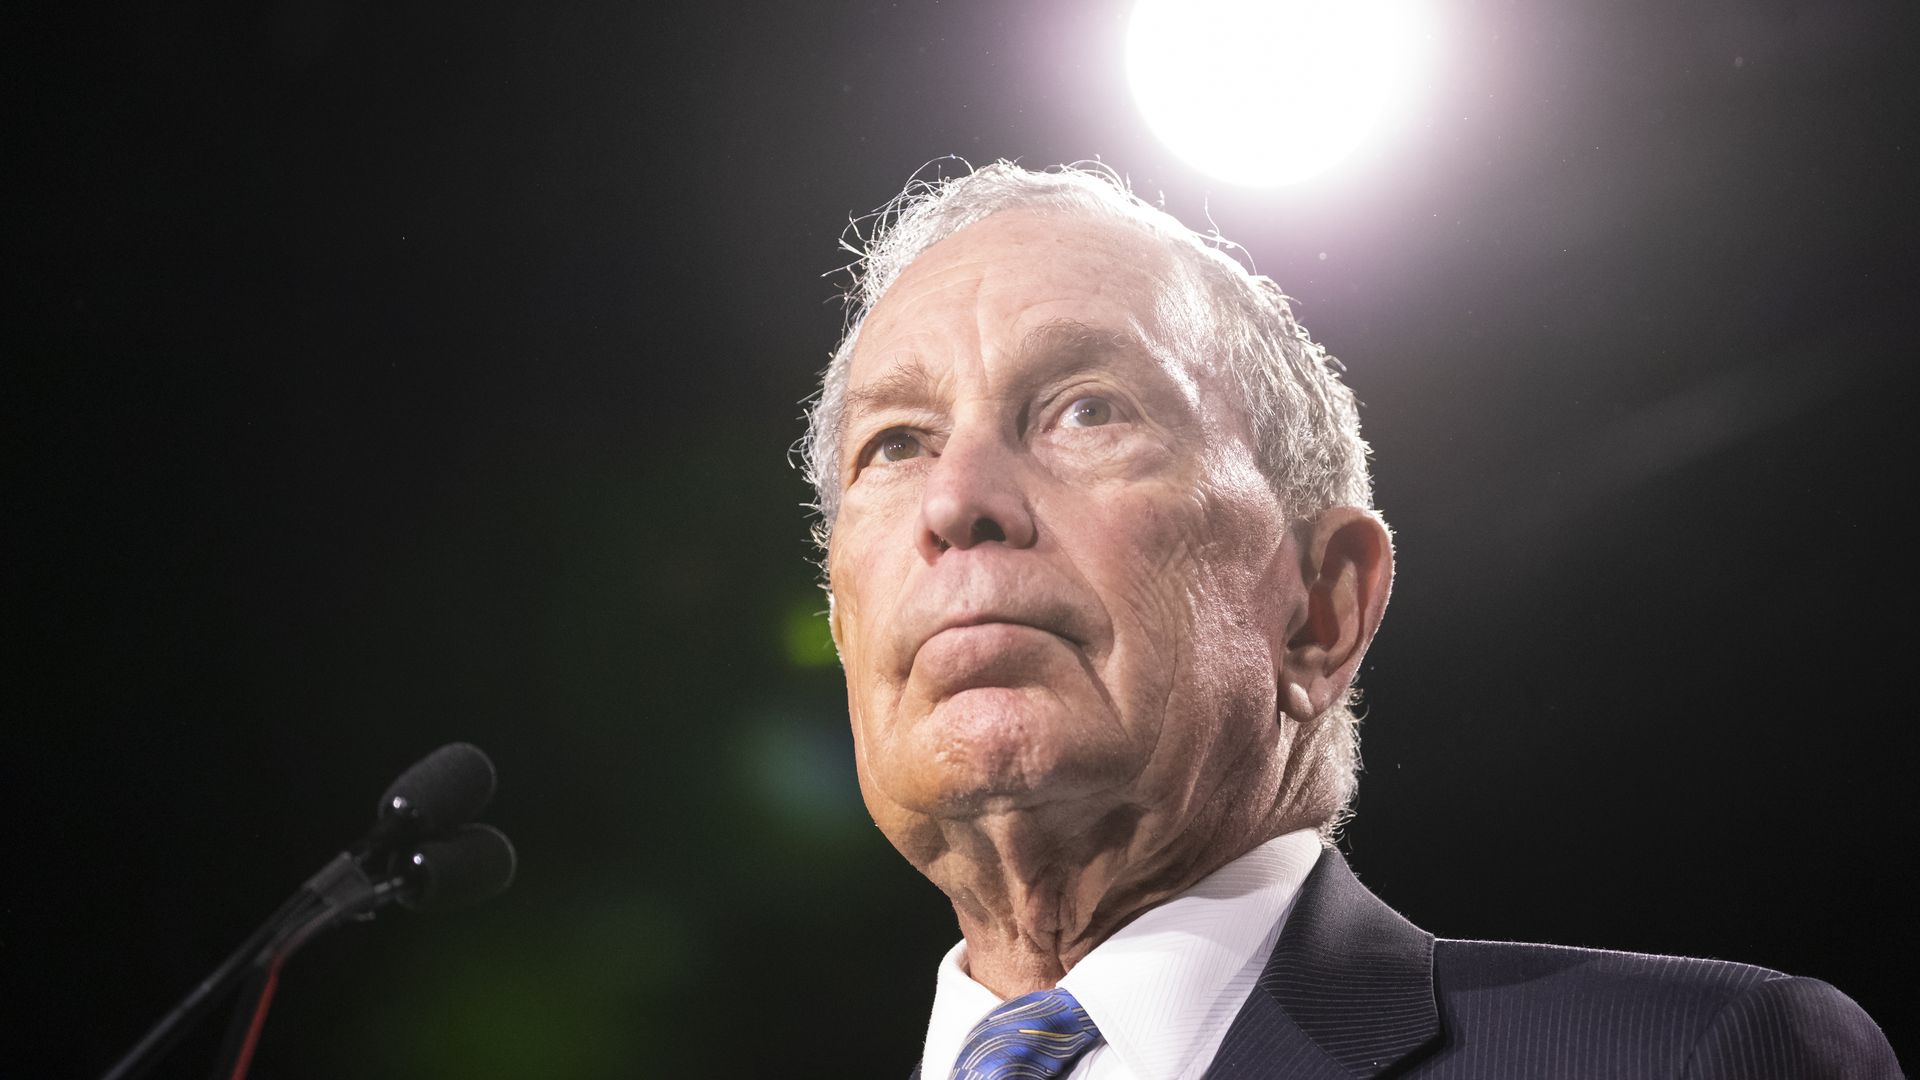 In this image, Bloomberg stands in a suit in front of a microphone.